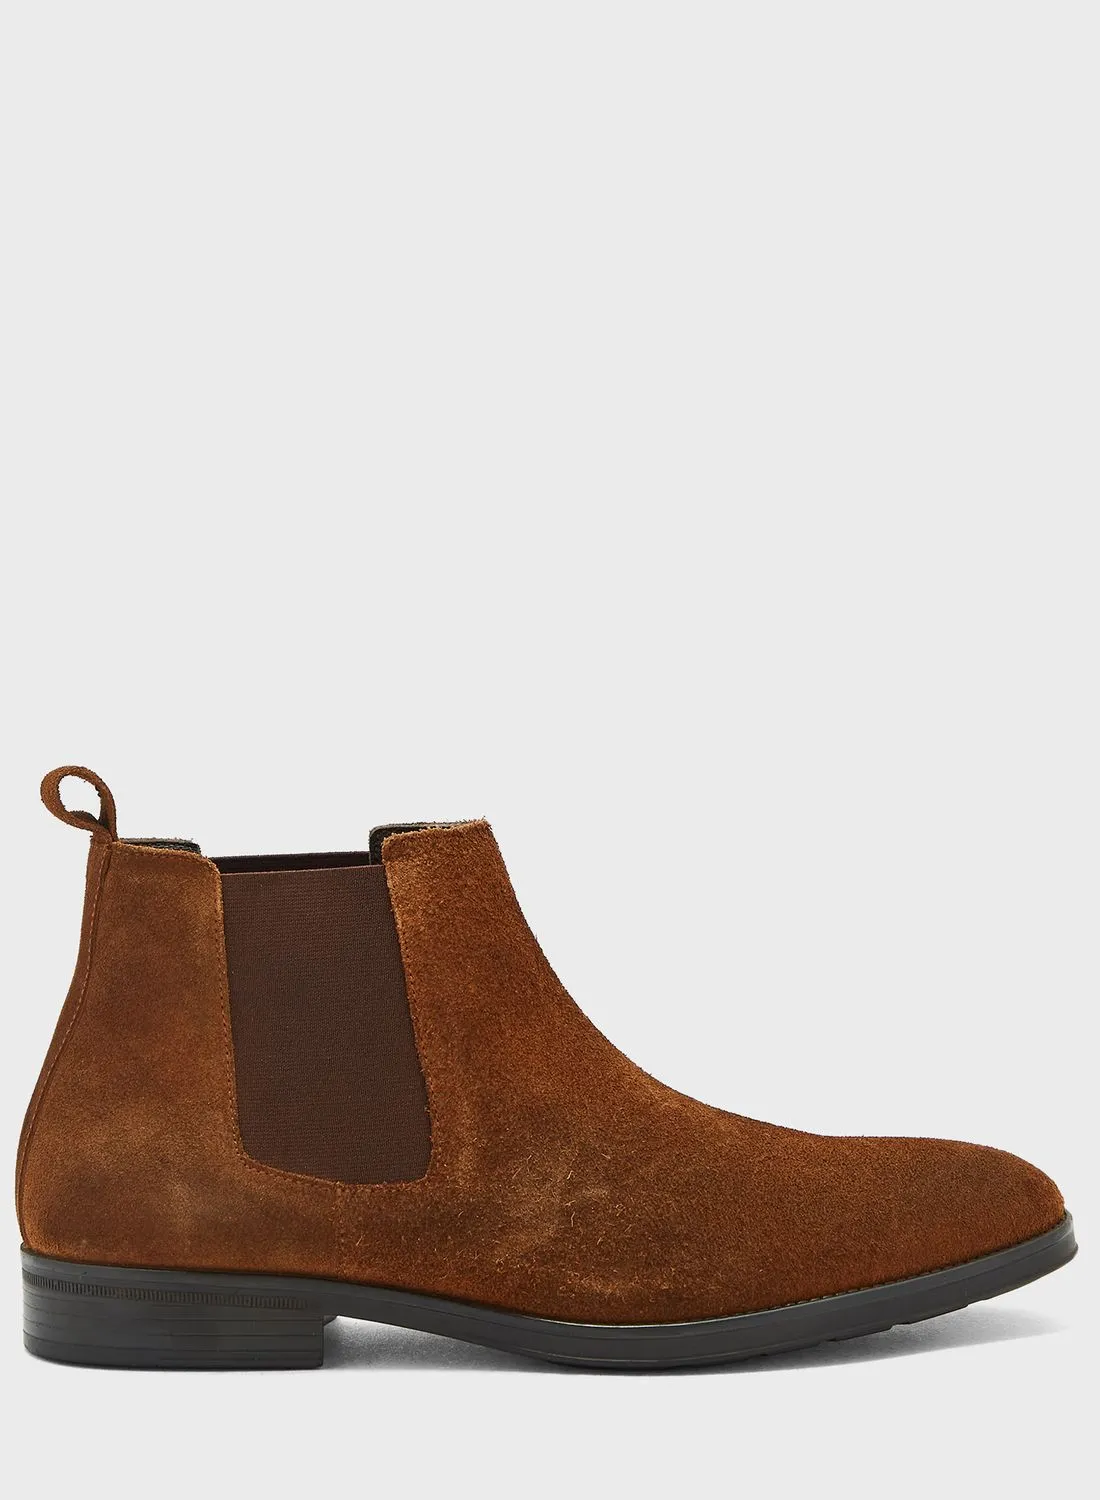 Robert Wood Genuine Suede Leather Chelsea Boots